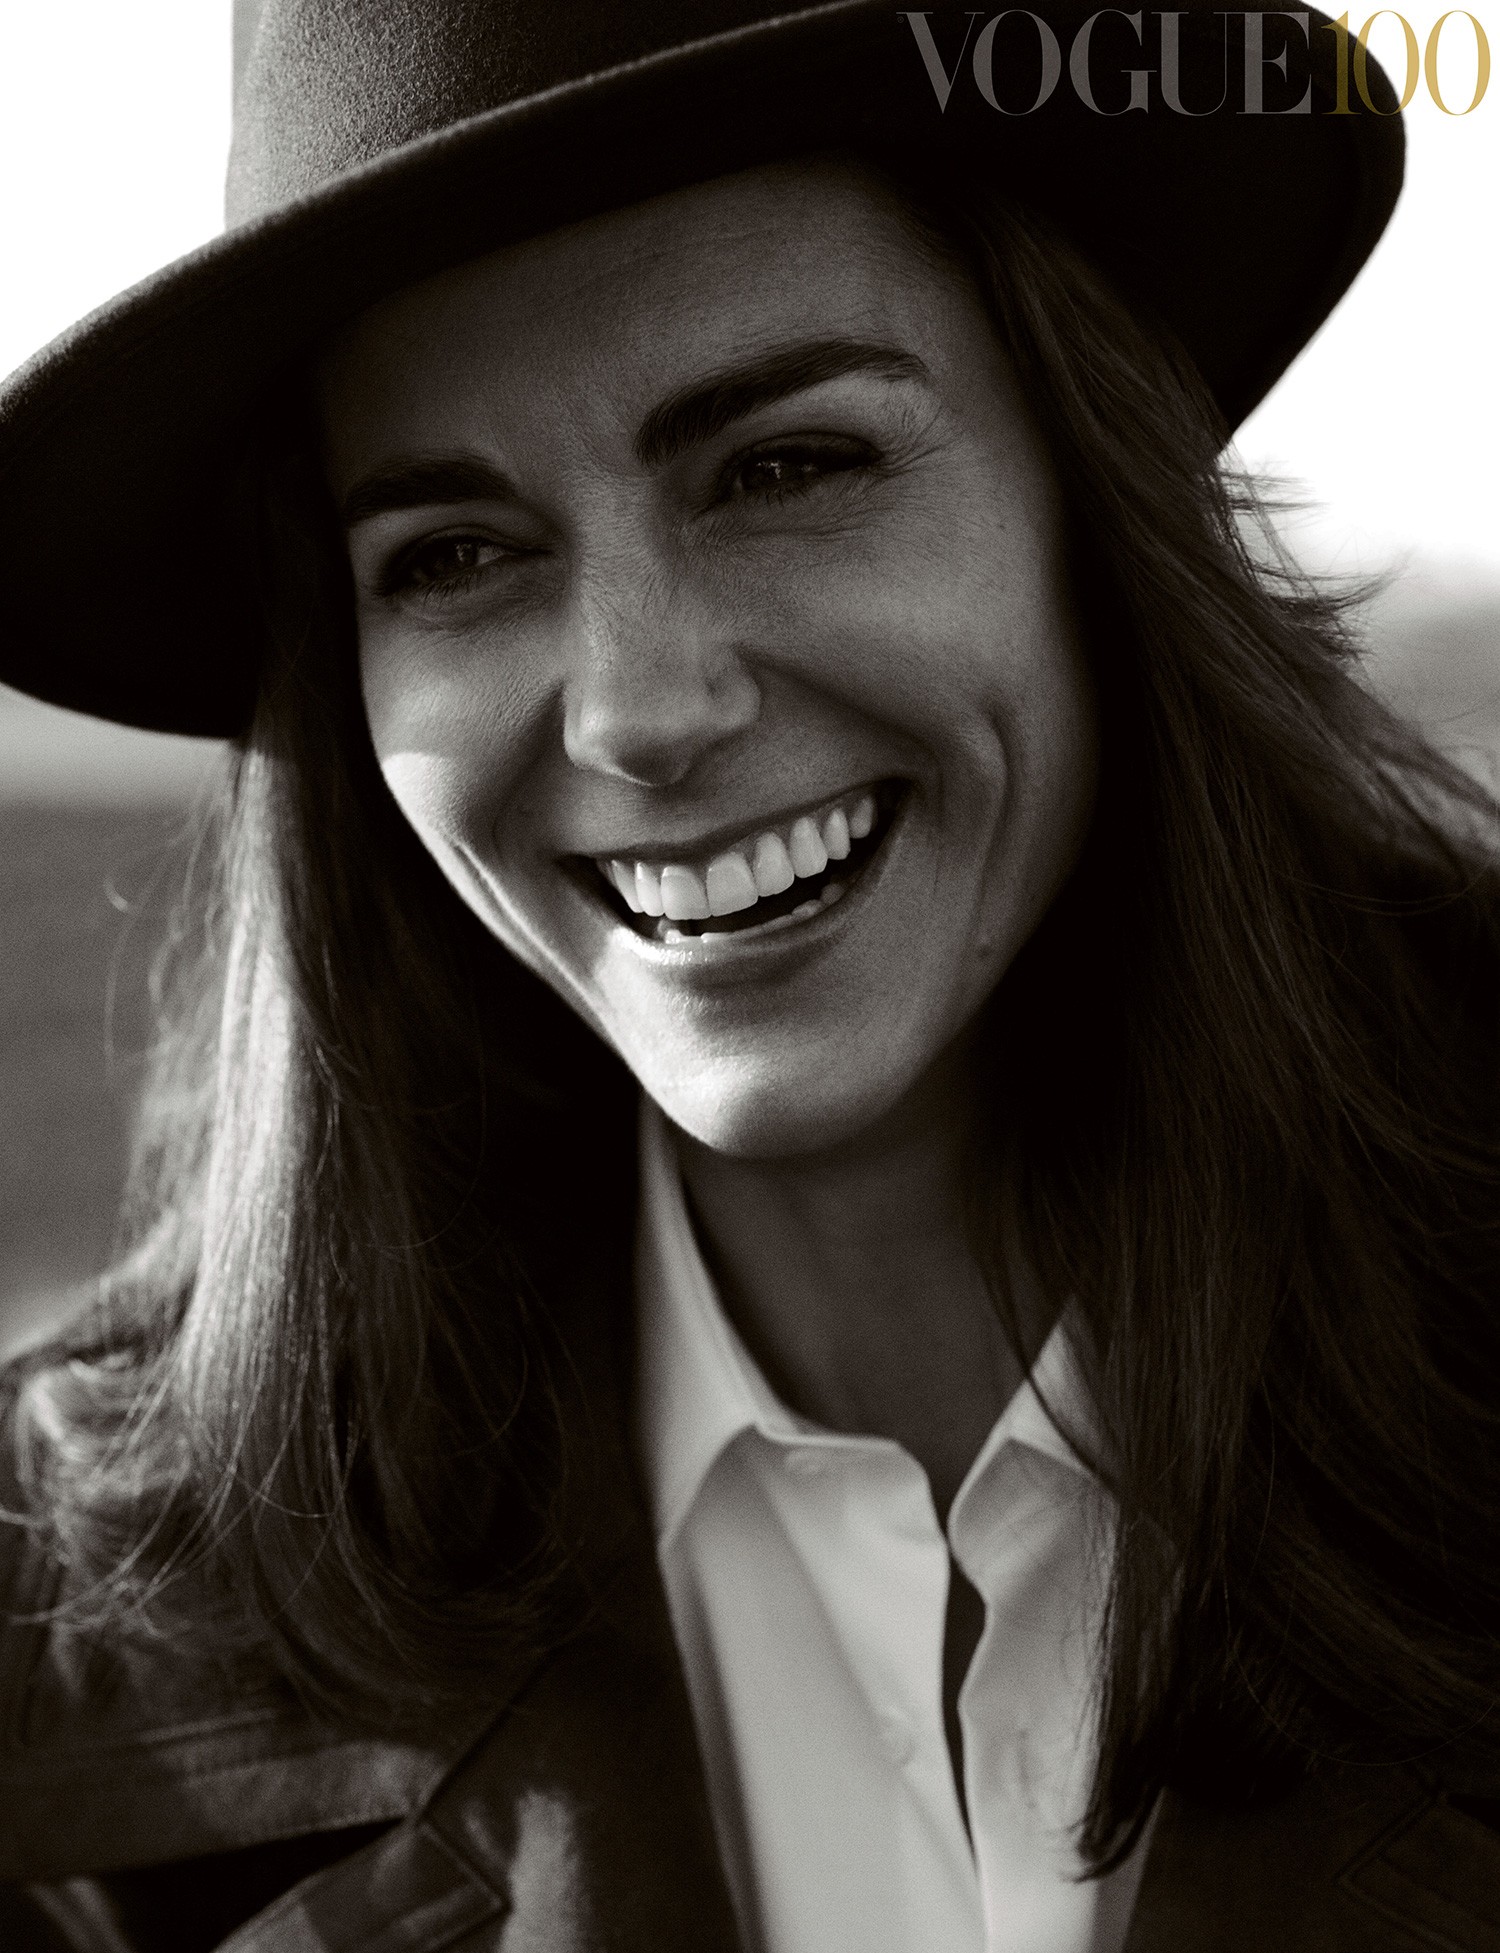 People 1500x1953 monochrome smiling hat lipstick Kate Middleton Vogue magazine face women with hats long hair women watermarked